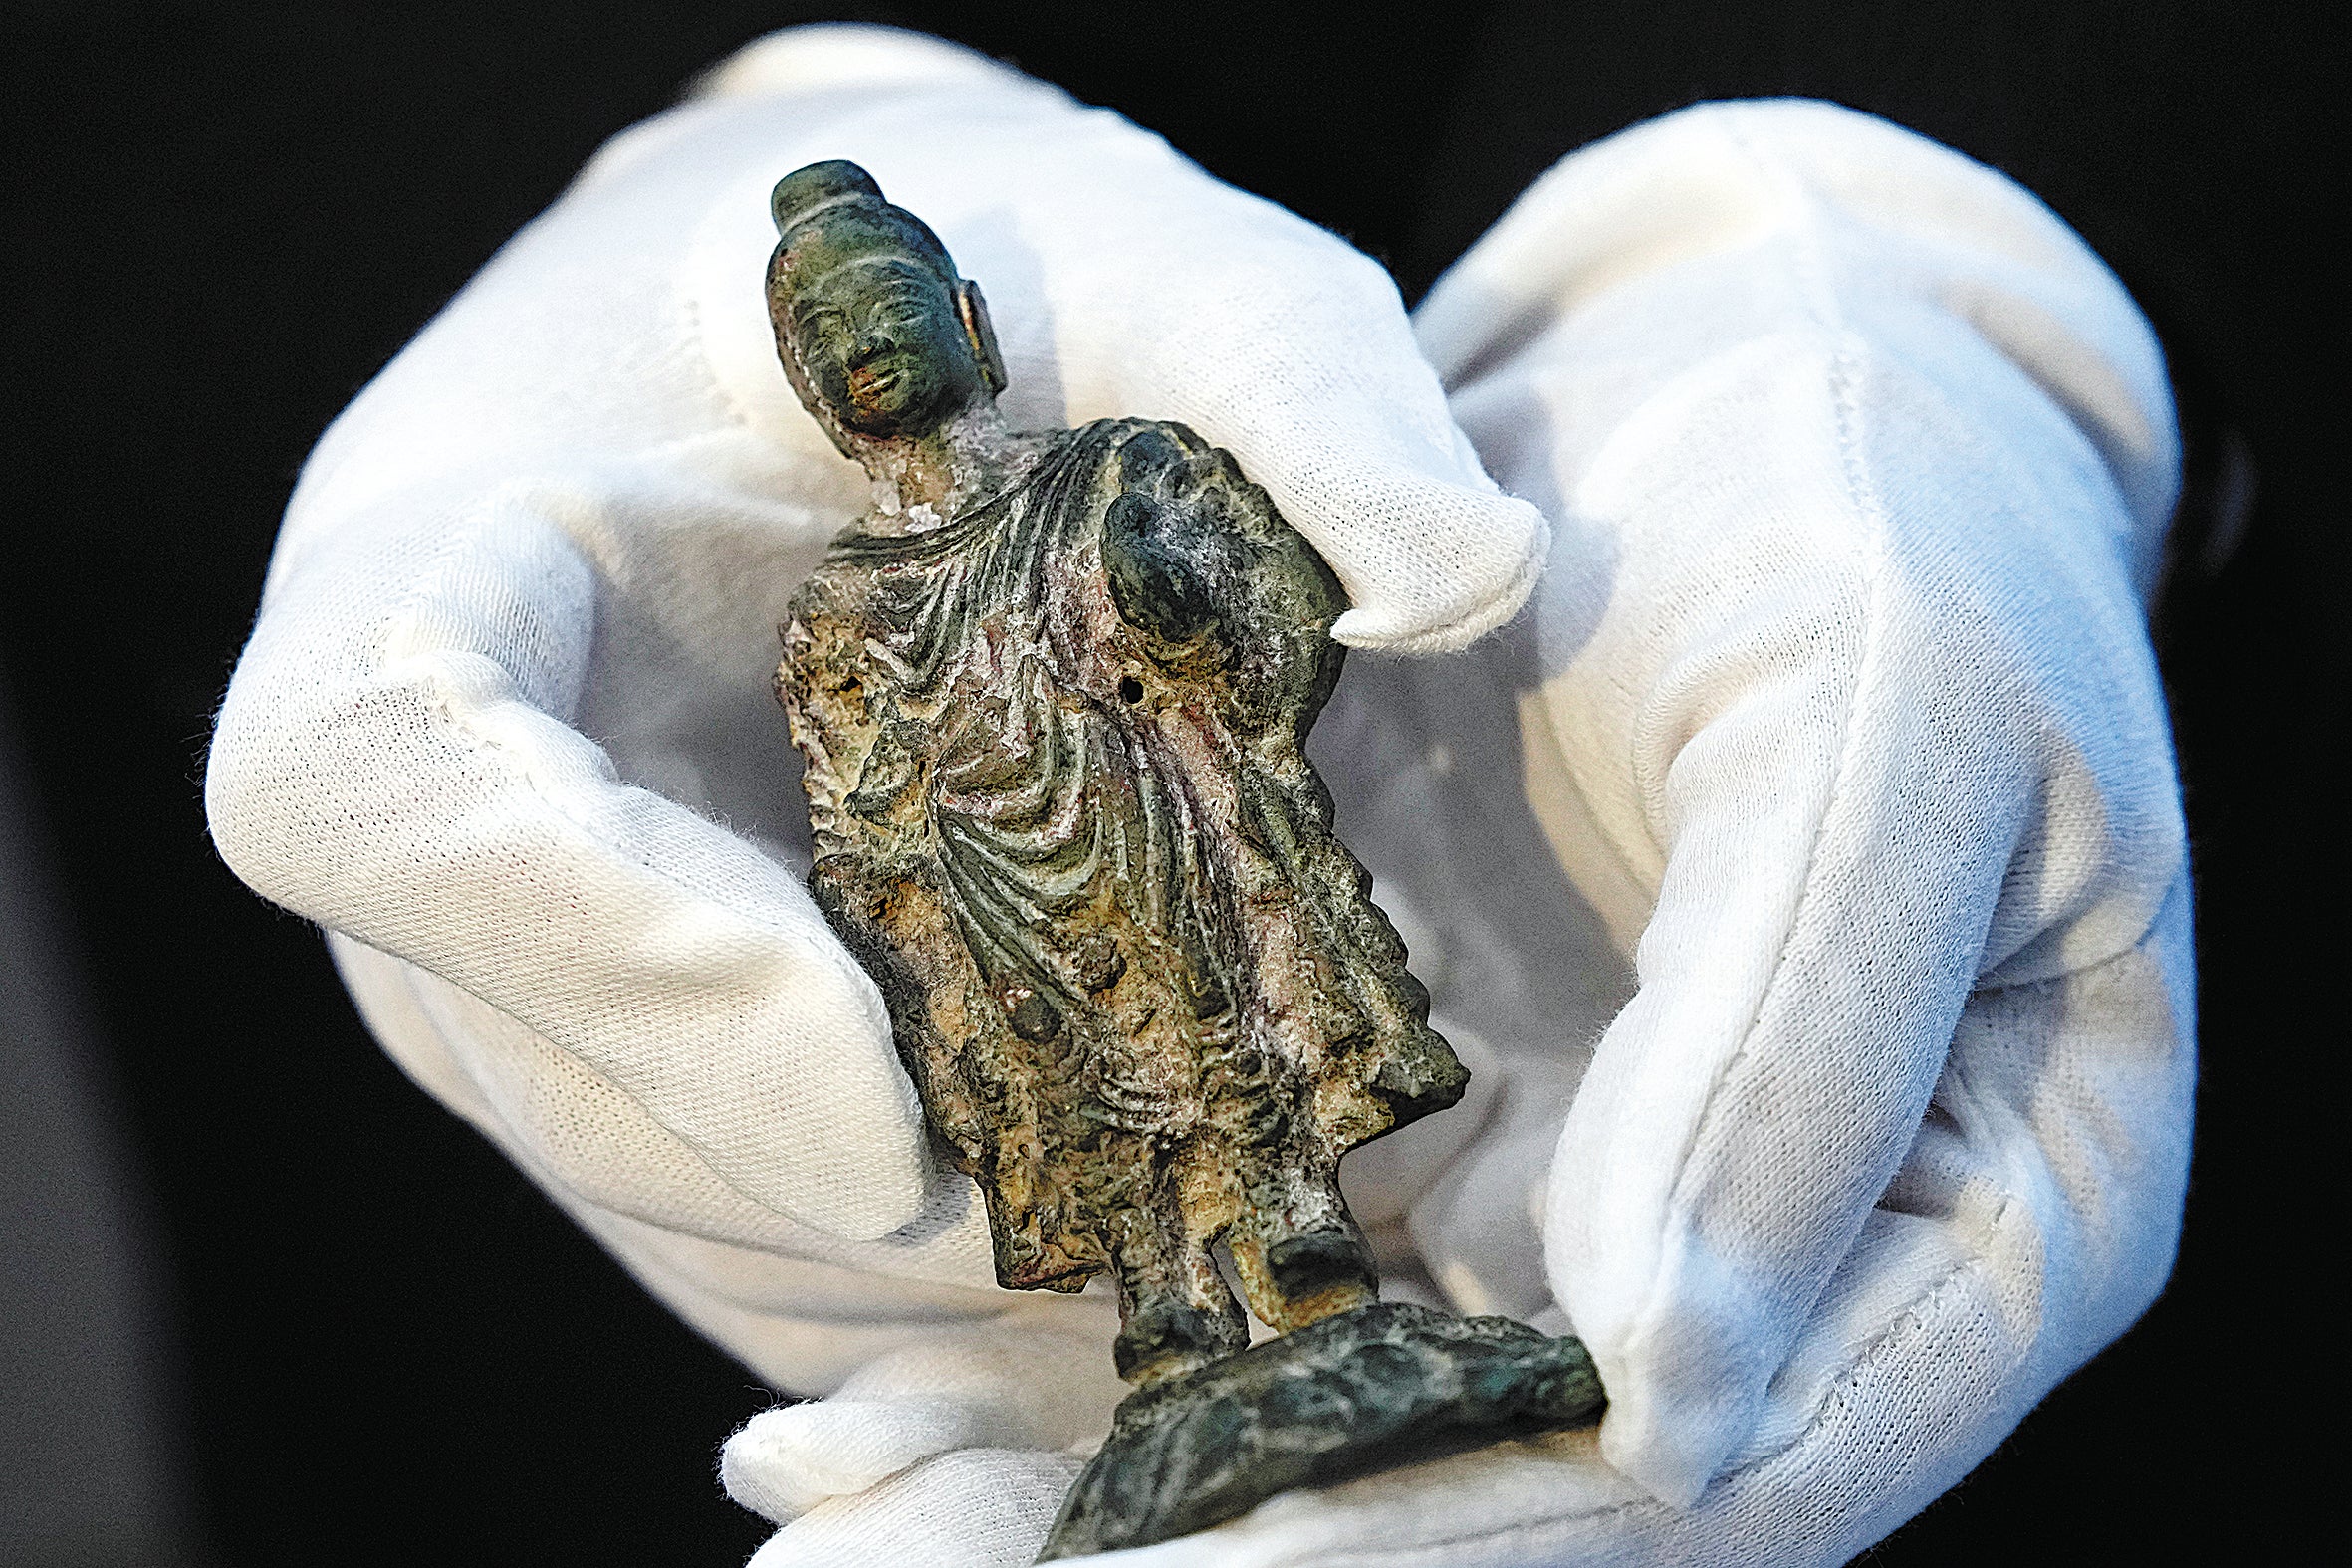 An archaeologist displays the standing statuette of the Gautama Buddha discovered in Xianyang, Shaanxi province